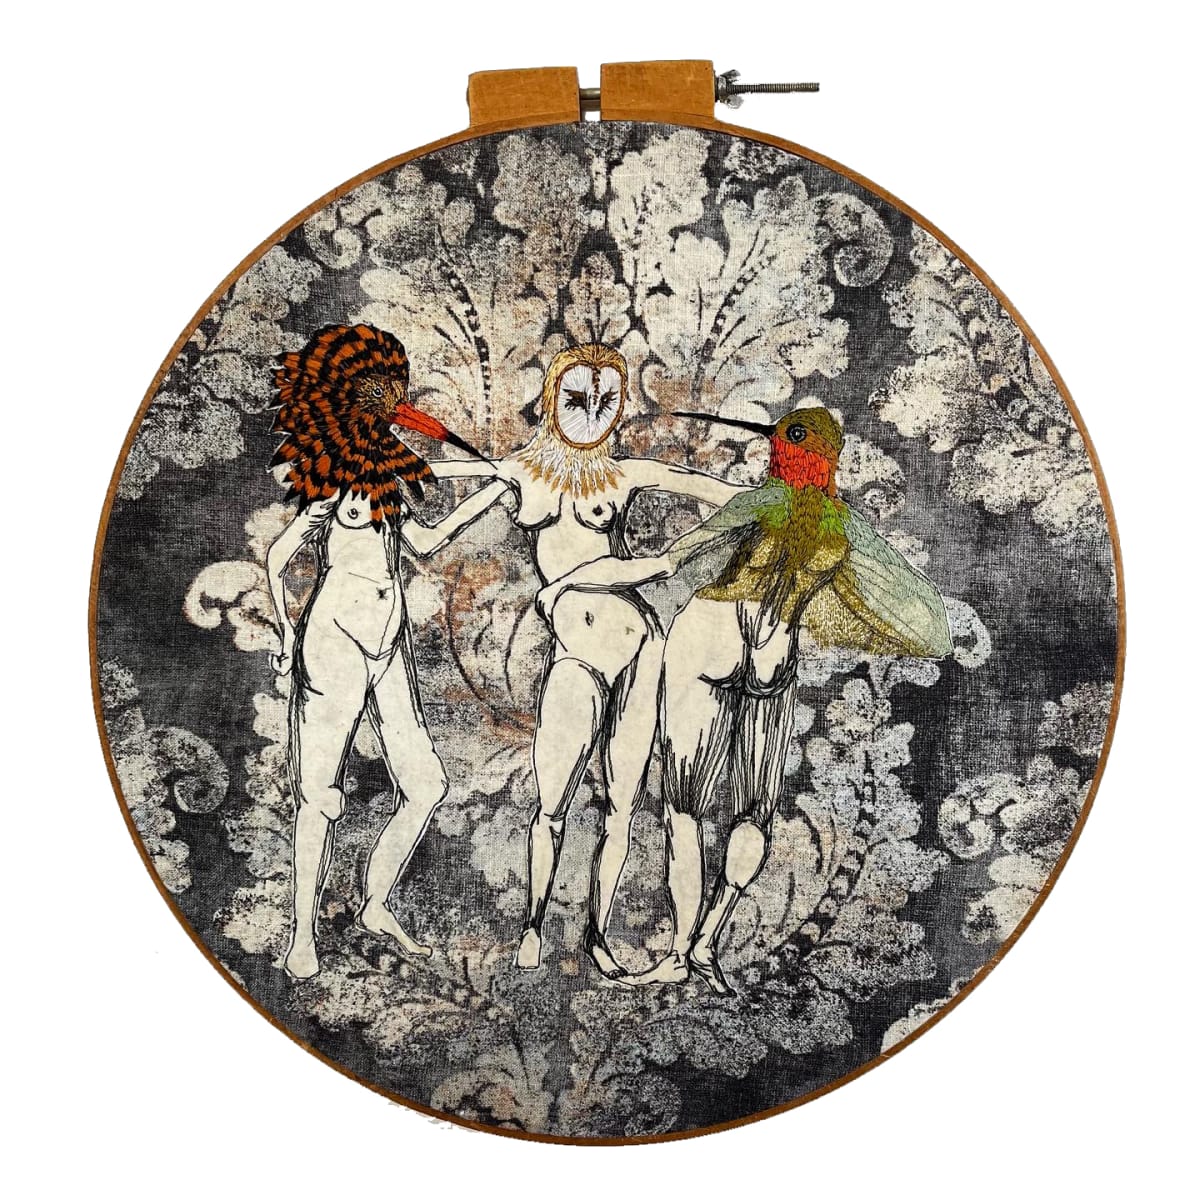 The Healing Three Graces by Jennifer McBrien  Image: The Healing Three Graces , 2022. 23" X 23" X 2", Freehand machine stitched figures with hand embroidered bird heads on decor fabric. 